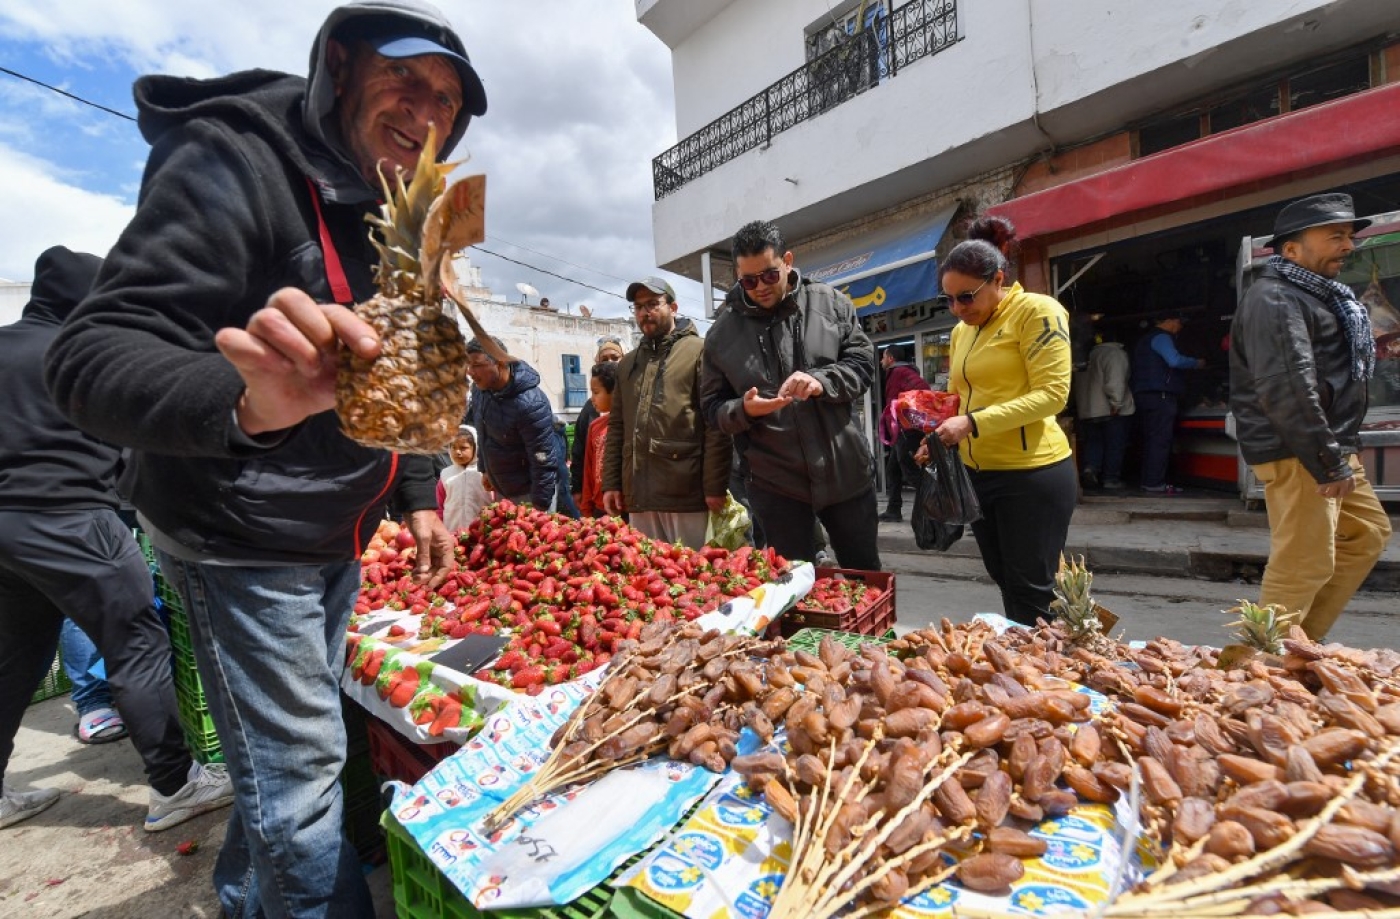 A street vendor holds up a pineapple at a market in Ariana, near the capital Tunis, on 2 April 2022 (AFP)